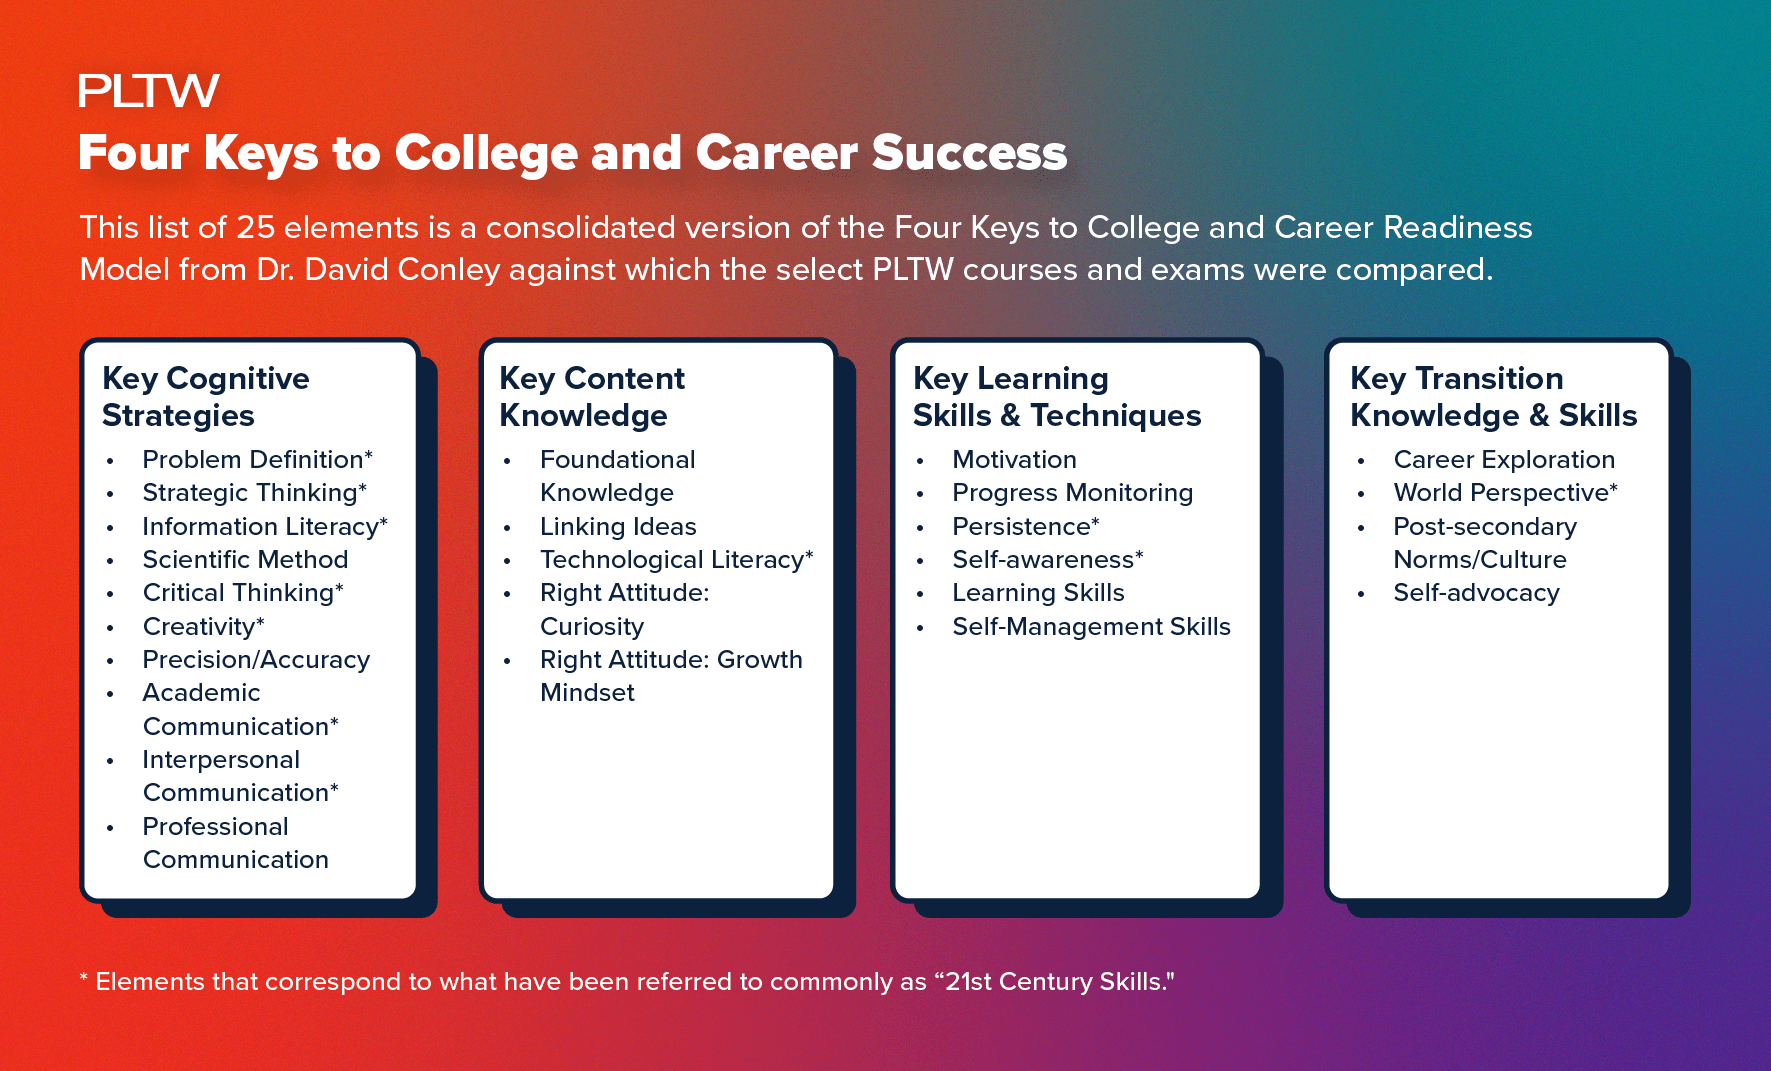 A list of 25 elements, which is consolidated from the Four Keys to College and Career Readiness Model from Dr. David Conley.